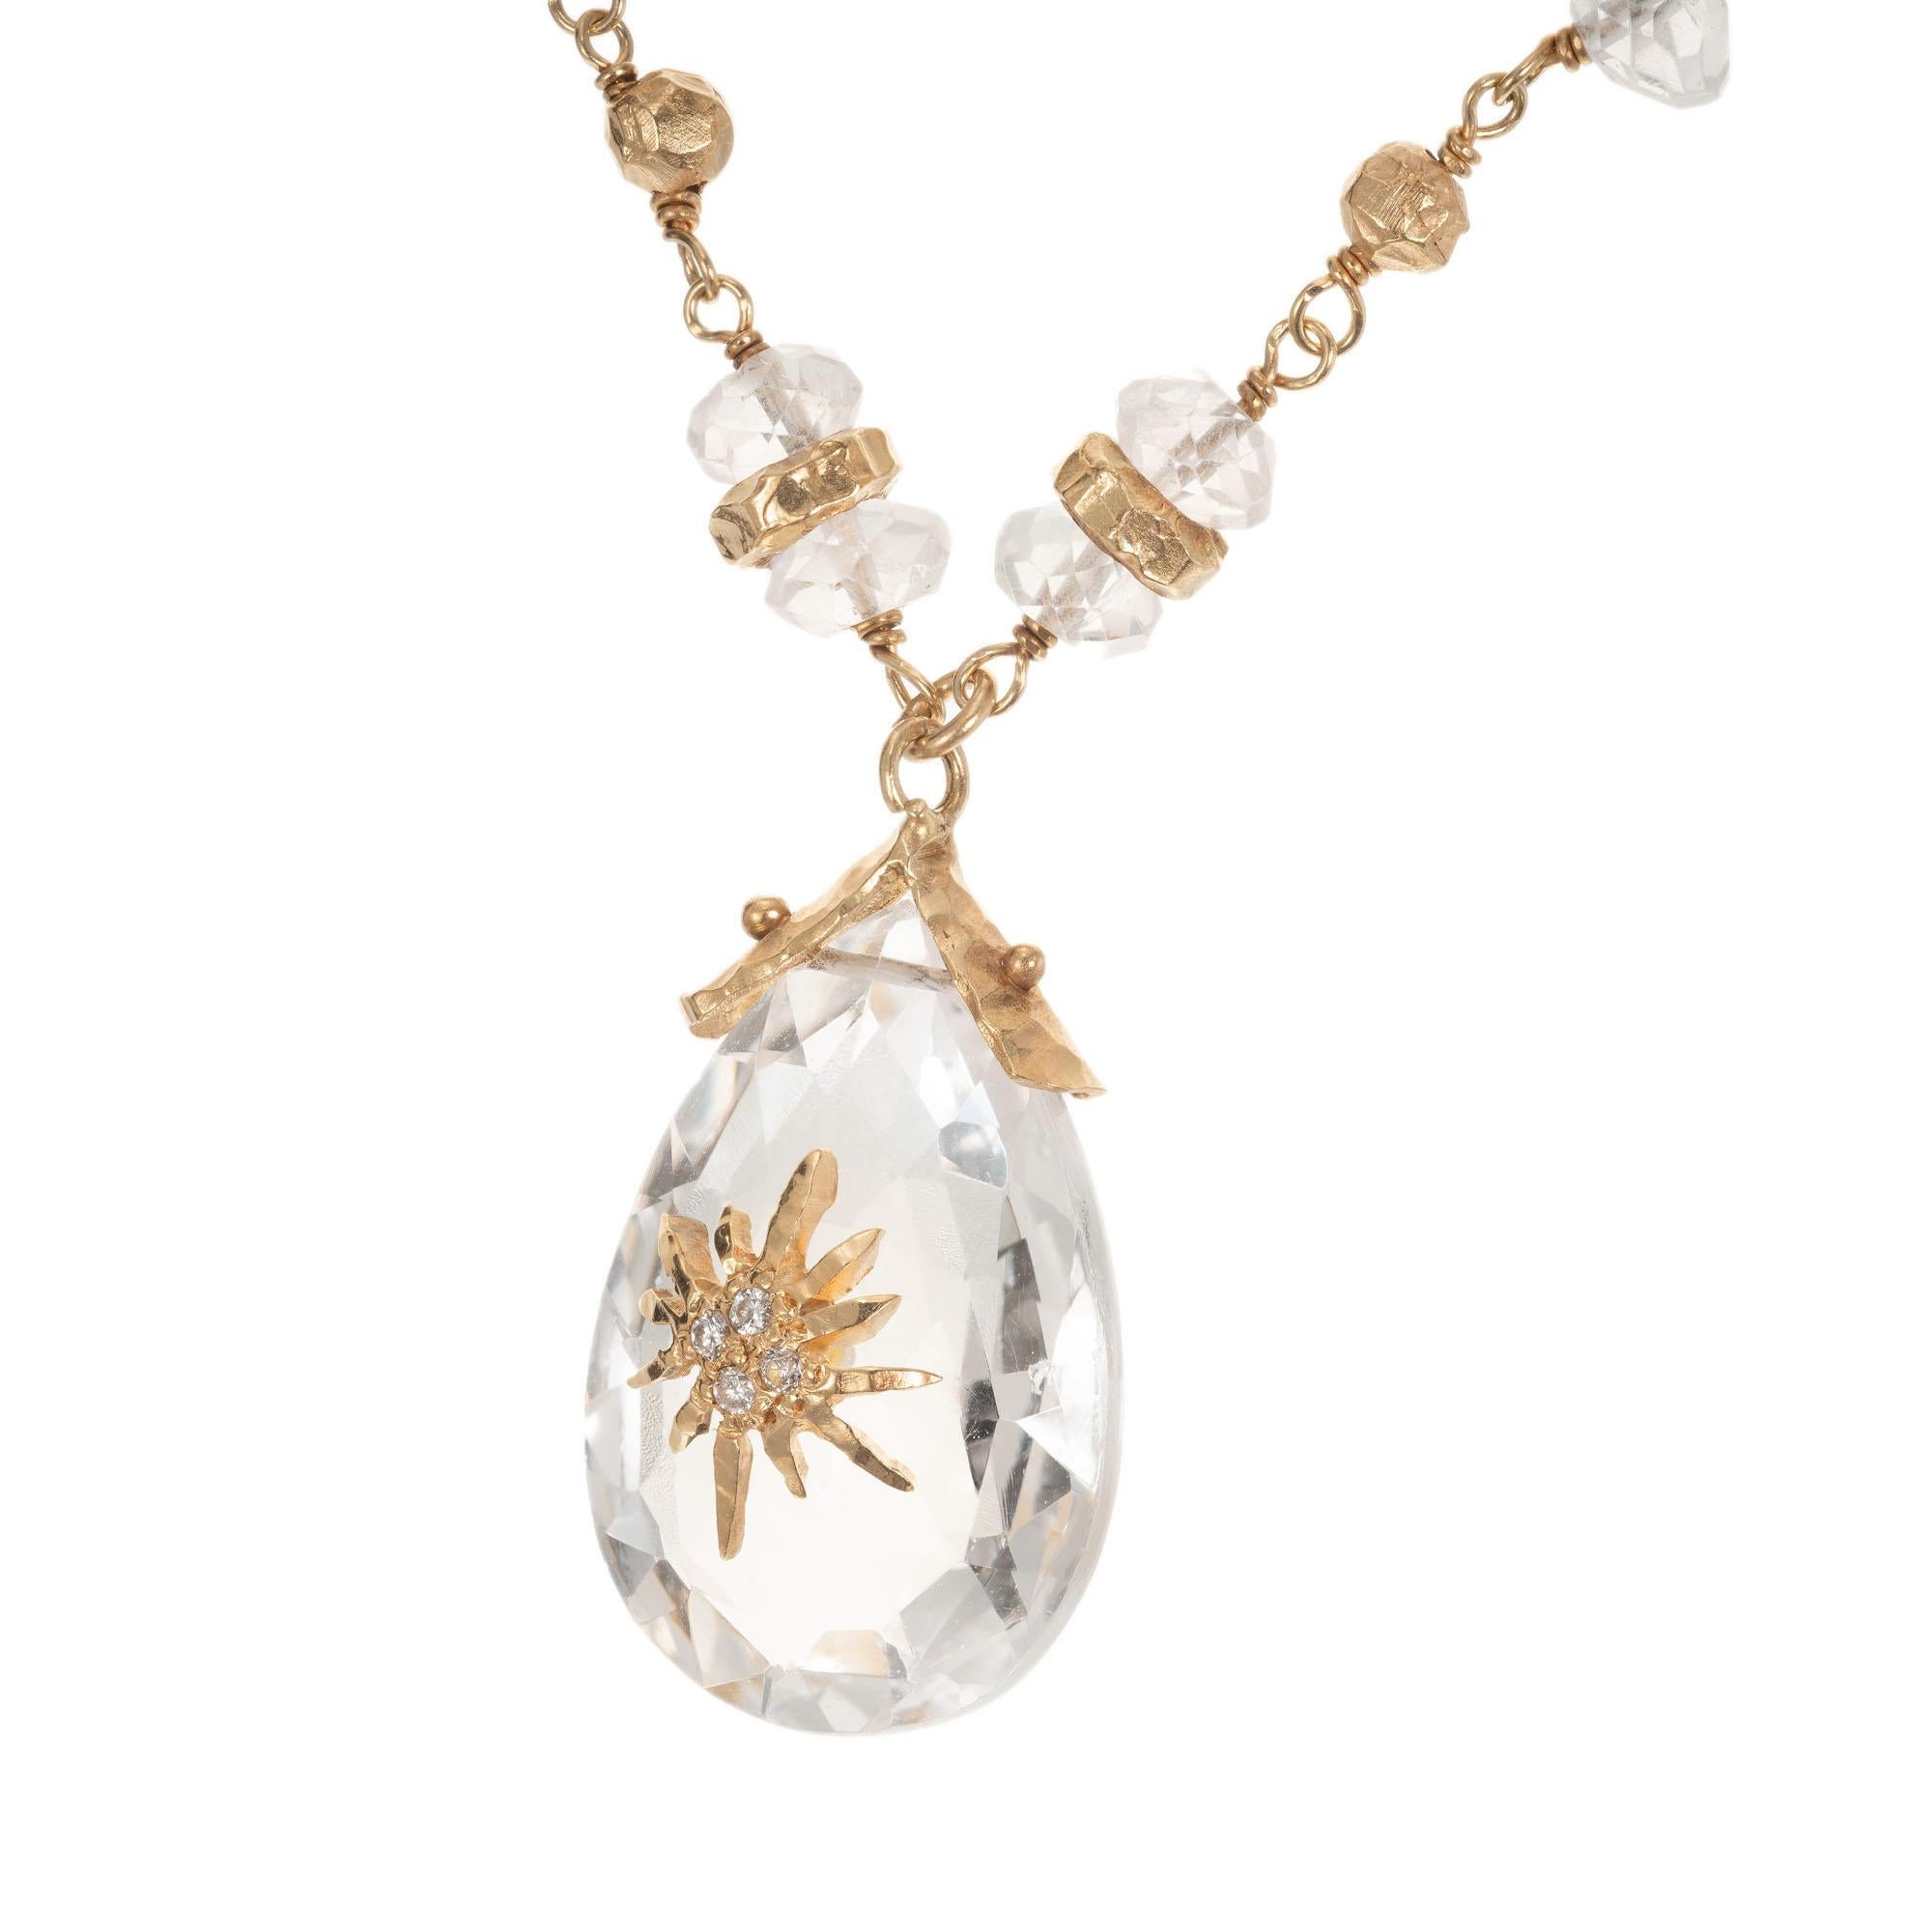 Quartz and diamond pendant necklace. Pear shaped quartz with 4 round accent diamonds and 32 faceted crystal beads. Handmade with hand hammered gold beads and spacers, hand wired stones and a handmade toggle and cap for the center stone.  Chain